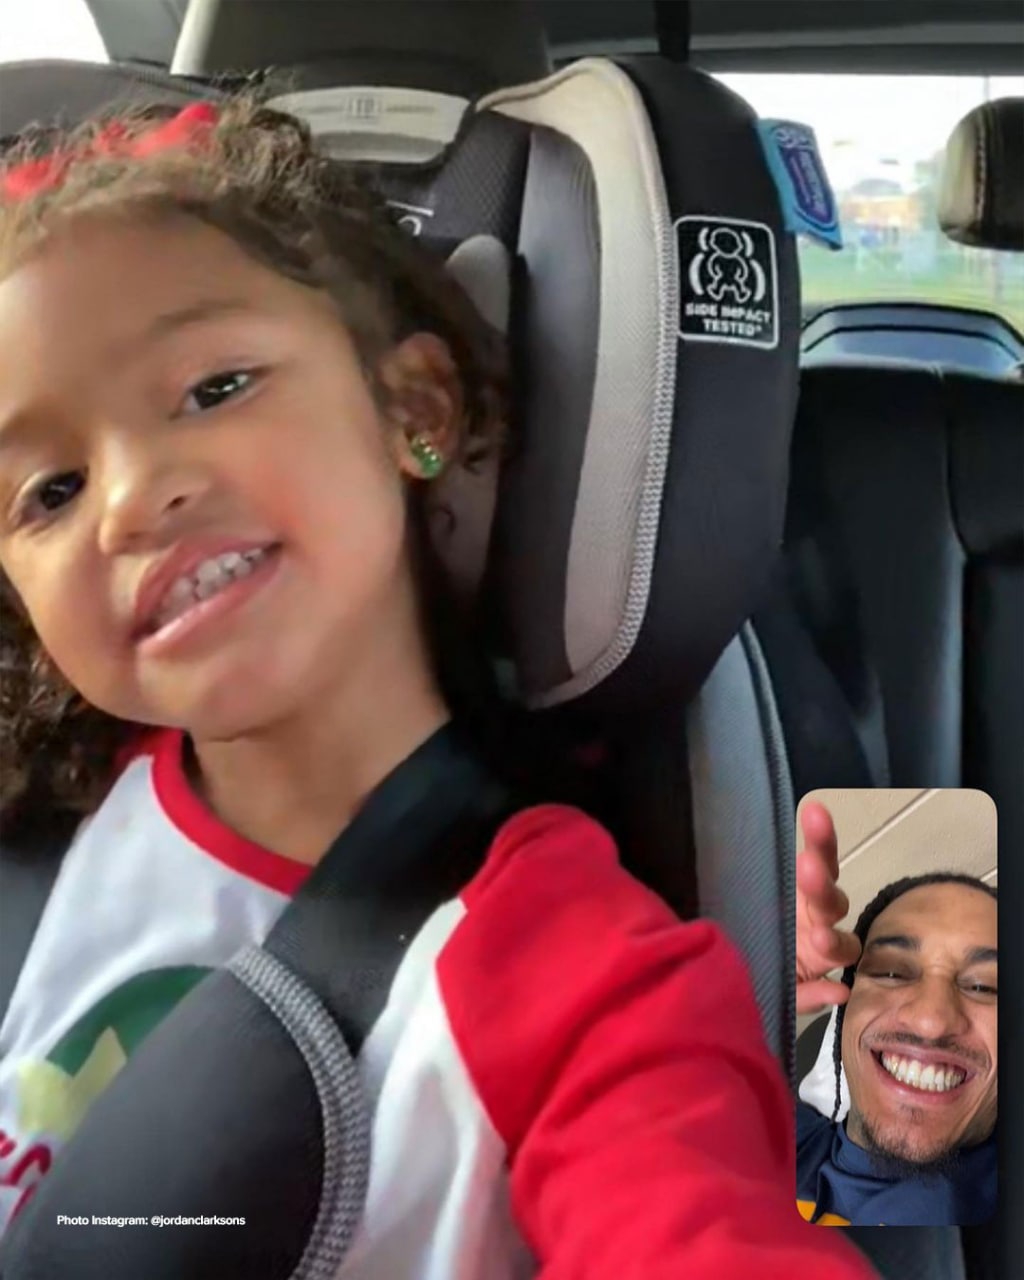 Jordan Clarkson on video call with his daughter